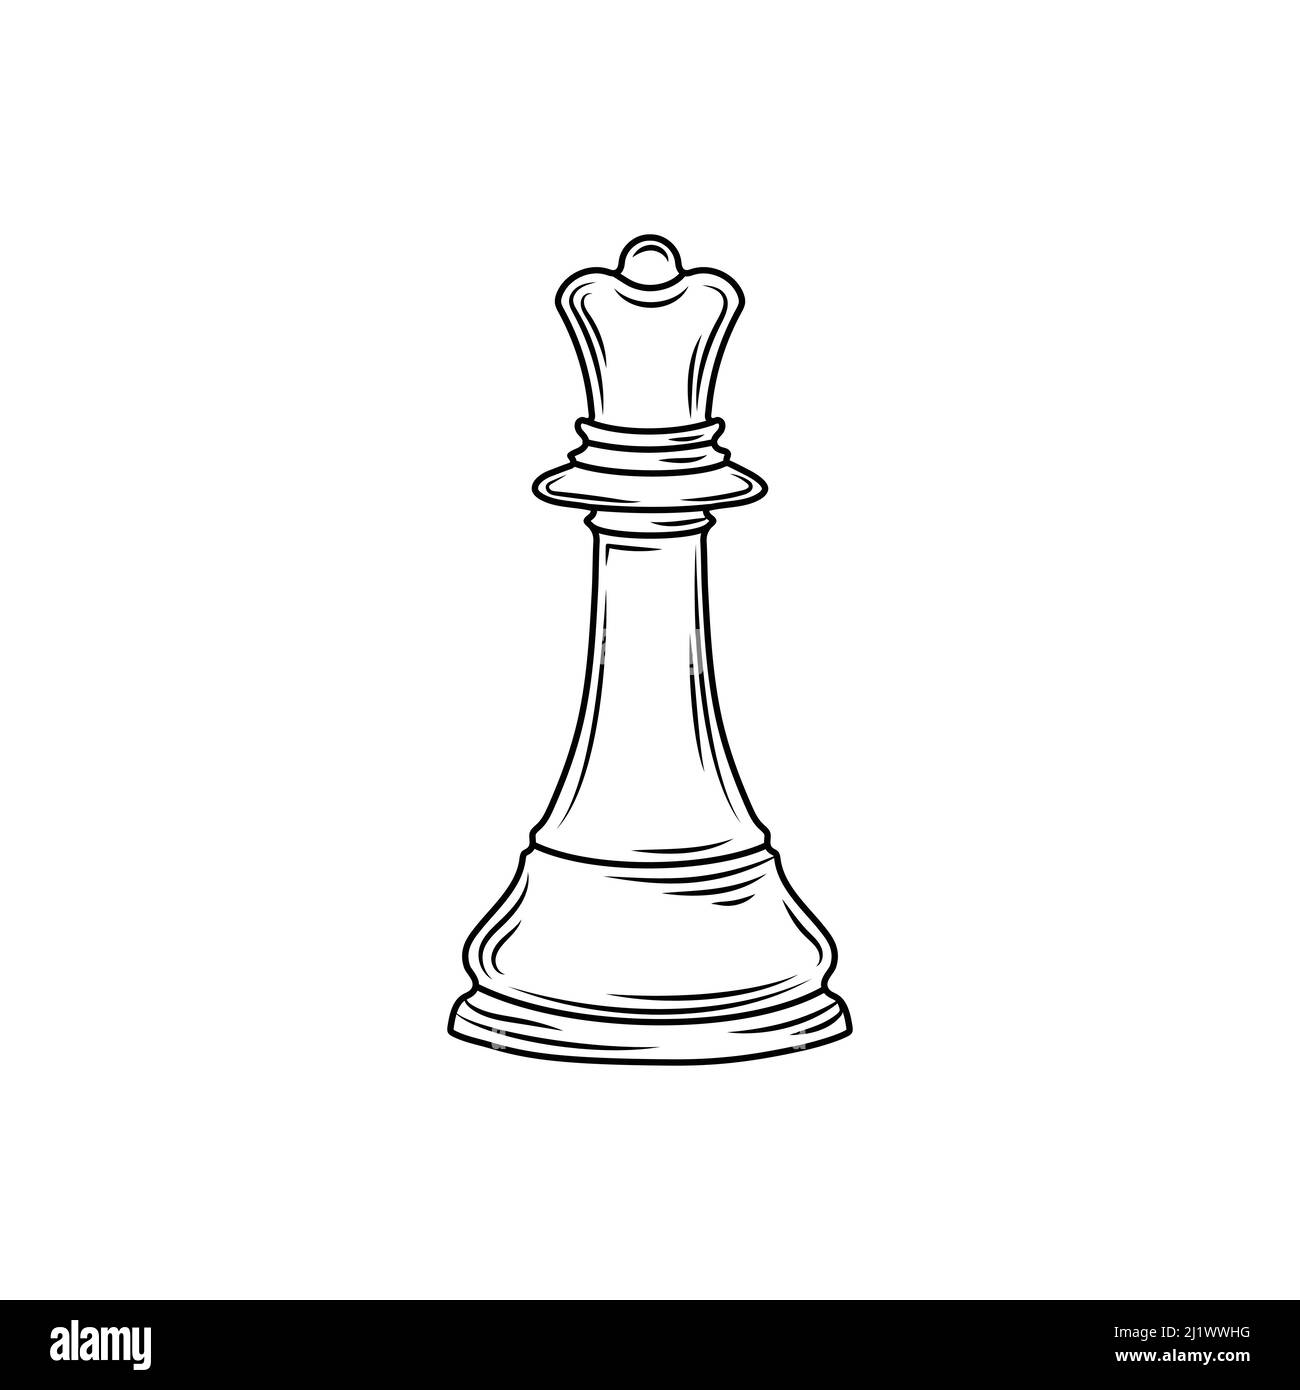 1,039 Queen Chess Piece Sketch Images, Stock Photos, 3D objects